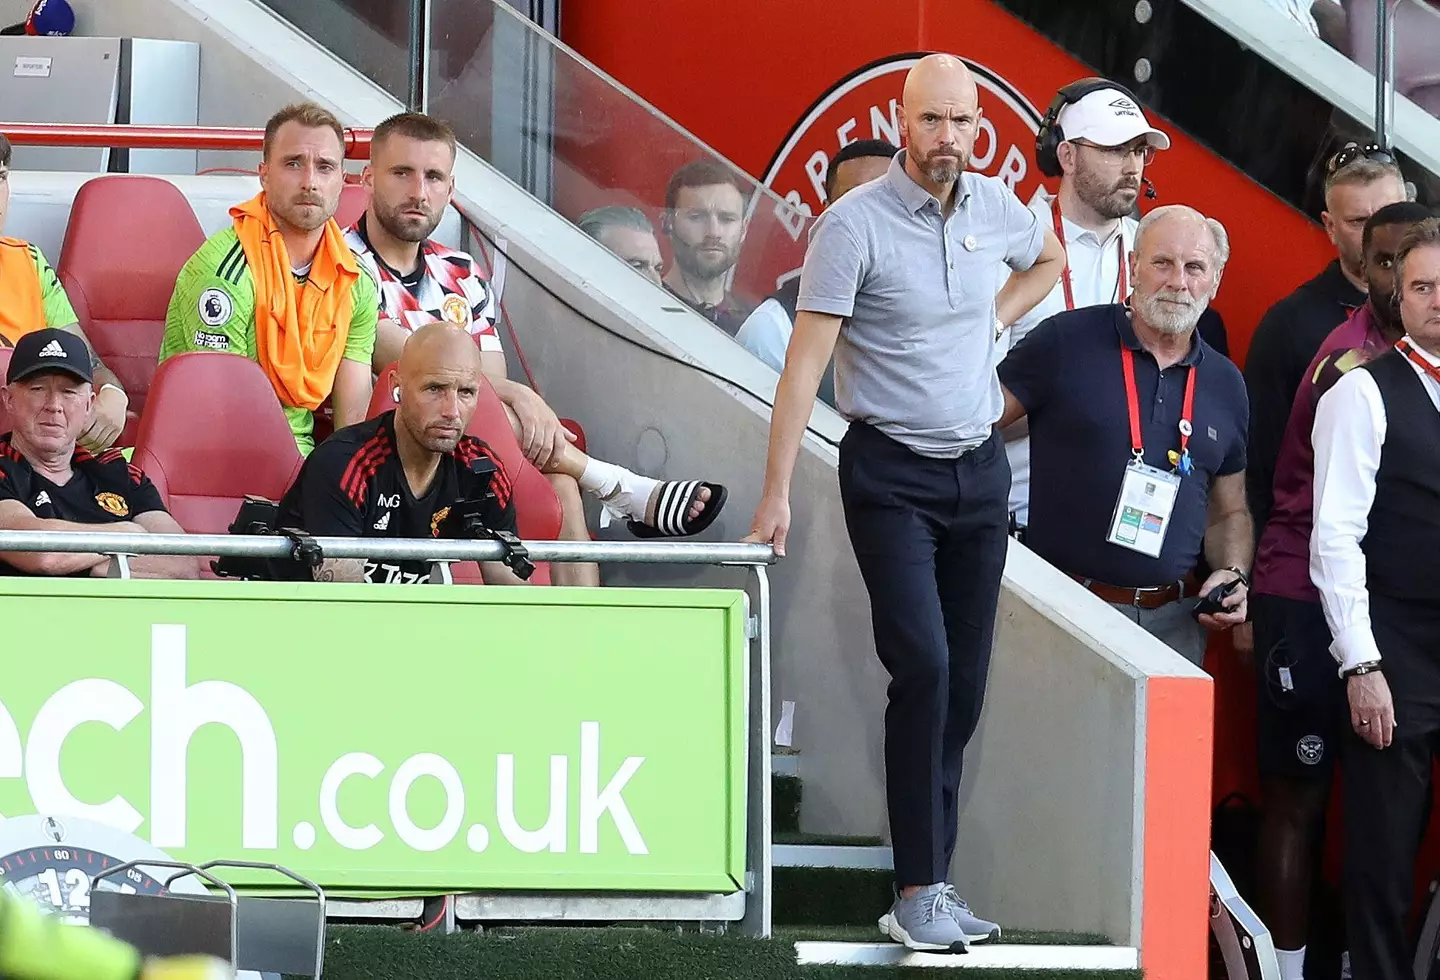 Ten Hag cuts a forlorn figure on the touchline. (Image